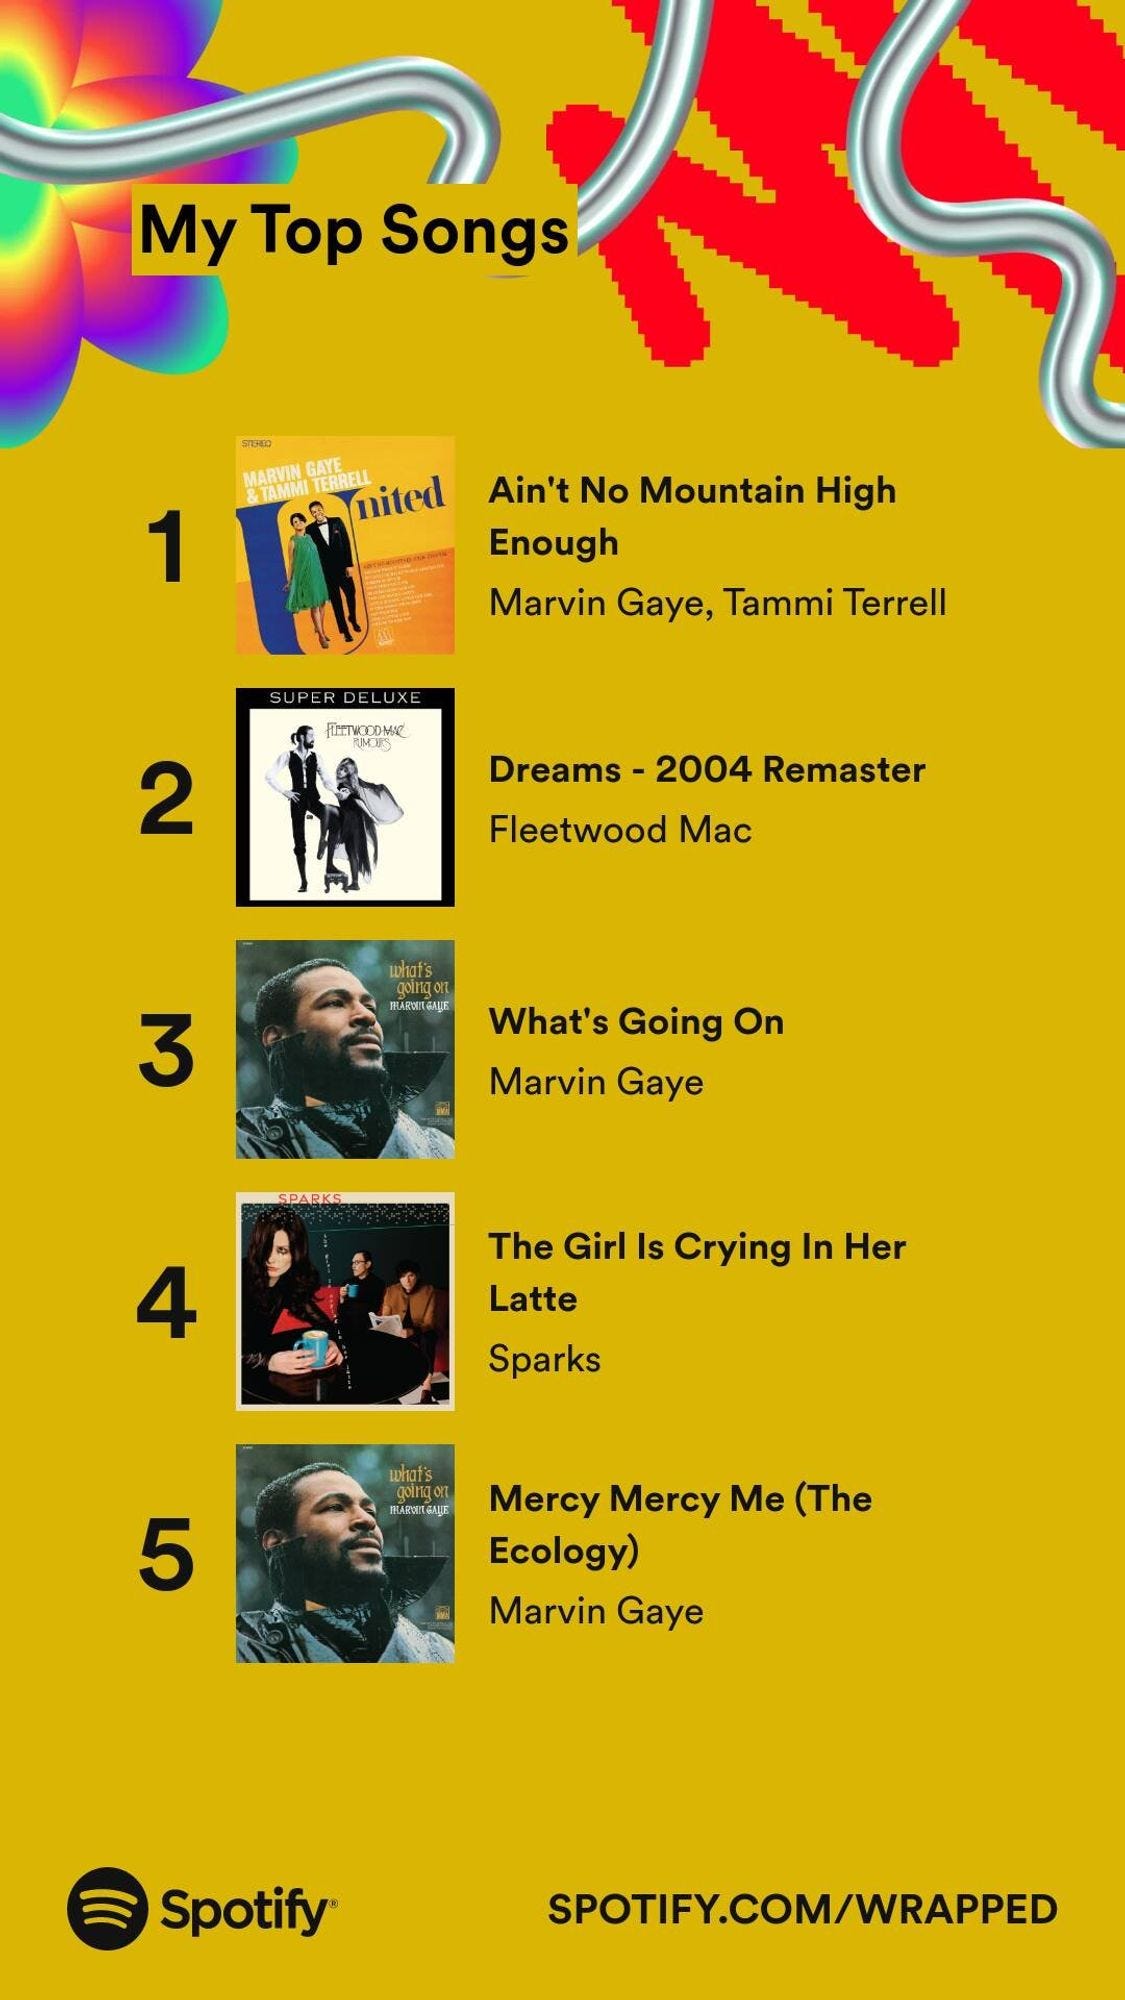 My Wrapped Top Five Songs: Ain't No Mountain High Enough (Marvin Gaye/Tammi Terrell), Dreams (Fleetwood Mac), What Is Going On (Marvin Gaye), The Girl Is Crying In Her Latte (Sparks), and Mercy Mercy Me (Marvin Gaye)